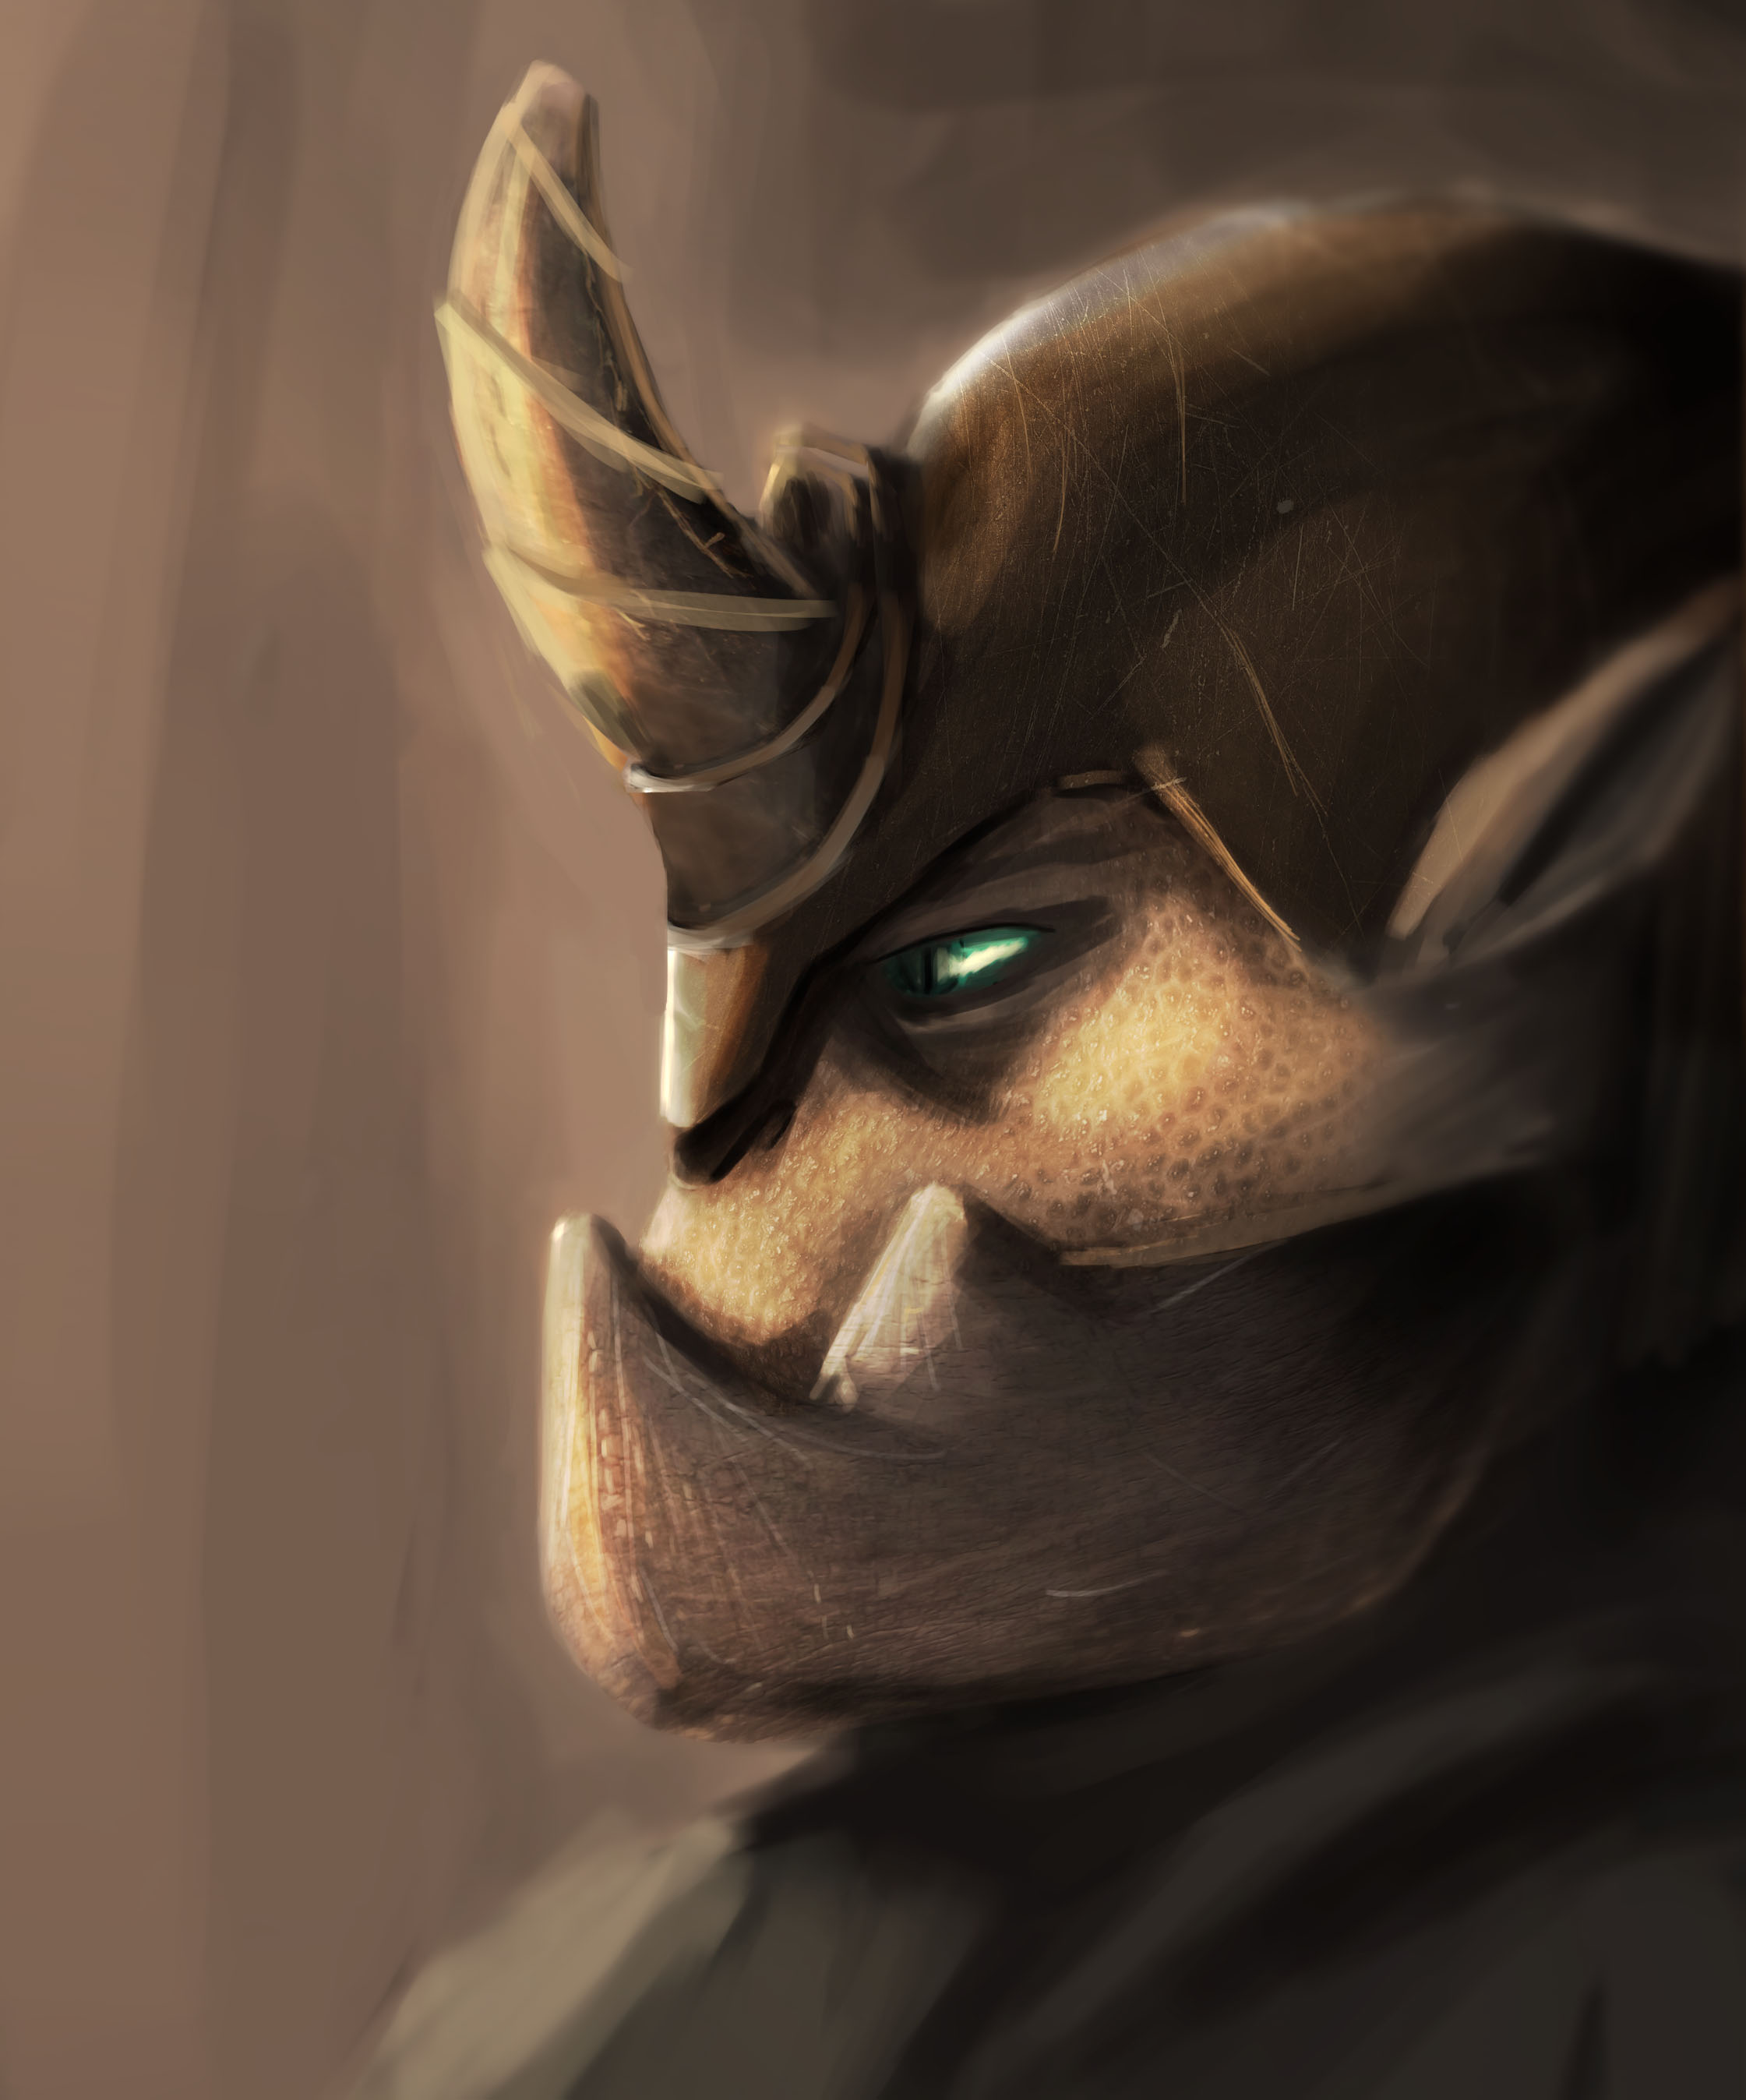 Orc Portrait Character Design
  
  <p>CONCEPT: Illustrate a portrait side view of a creature/warrior</p>
  <p>HOW DESIGN SOLVES PROBLEMS: Strong jaw and helmet to suggest the warrior persona of the character.</p>
  <p>PROCESS: sketch and refine</p>
  <p>TOOLS USED: Photoshop</p>
  <p>CHALLENGES: Keeping a warrior and primal mood to the character, while suggesting a beautiful setting with the light.</p>
  